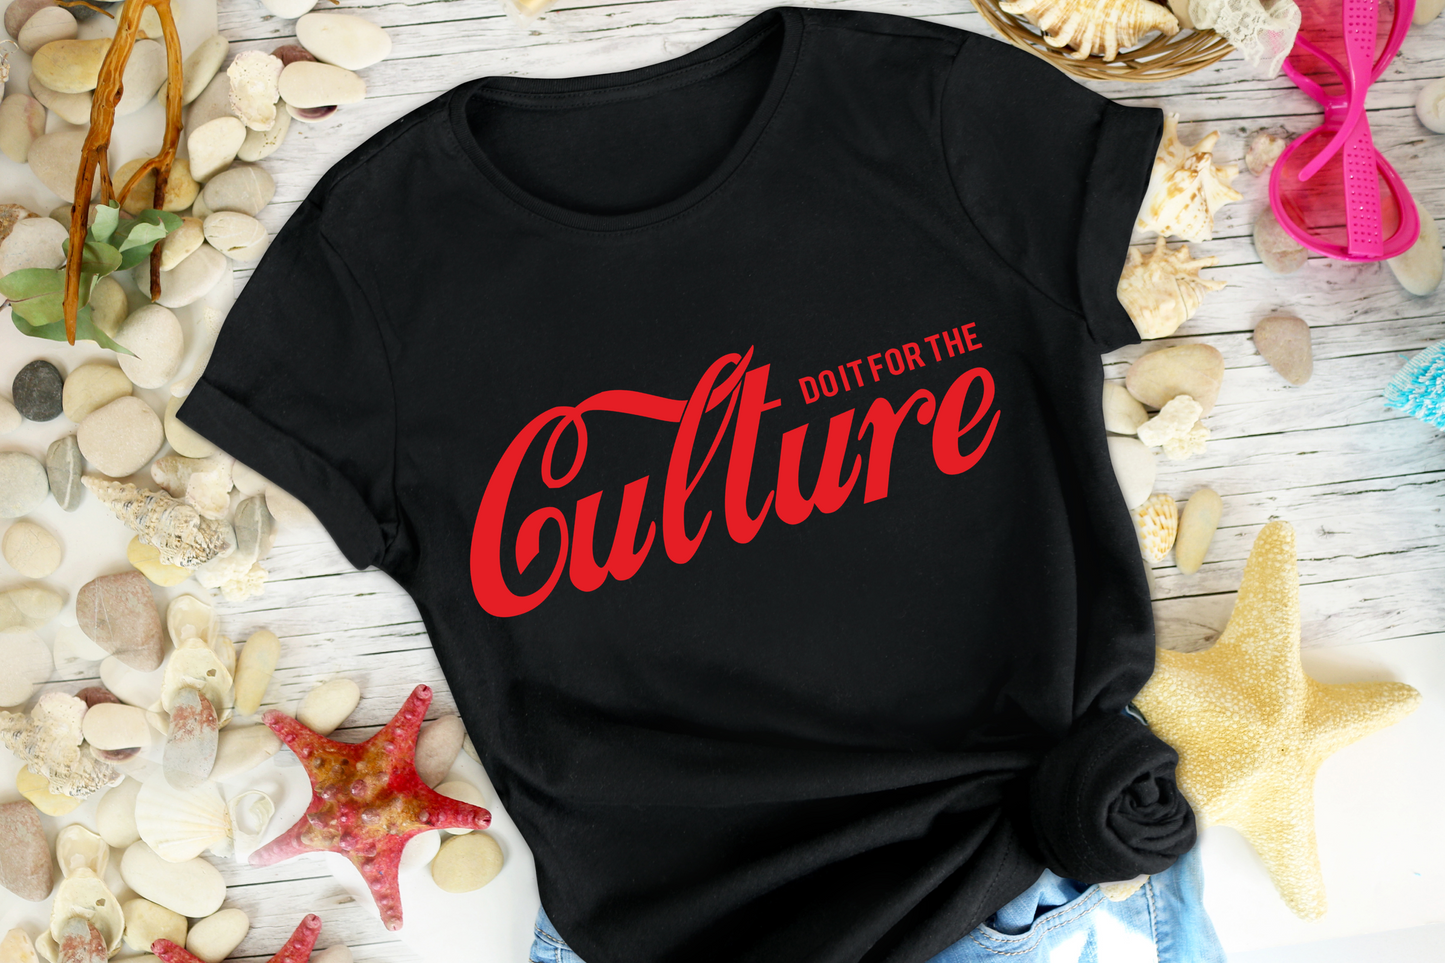 For the Culture Adult Tshirt